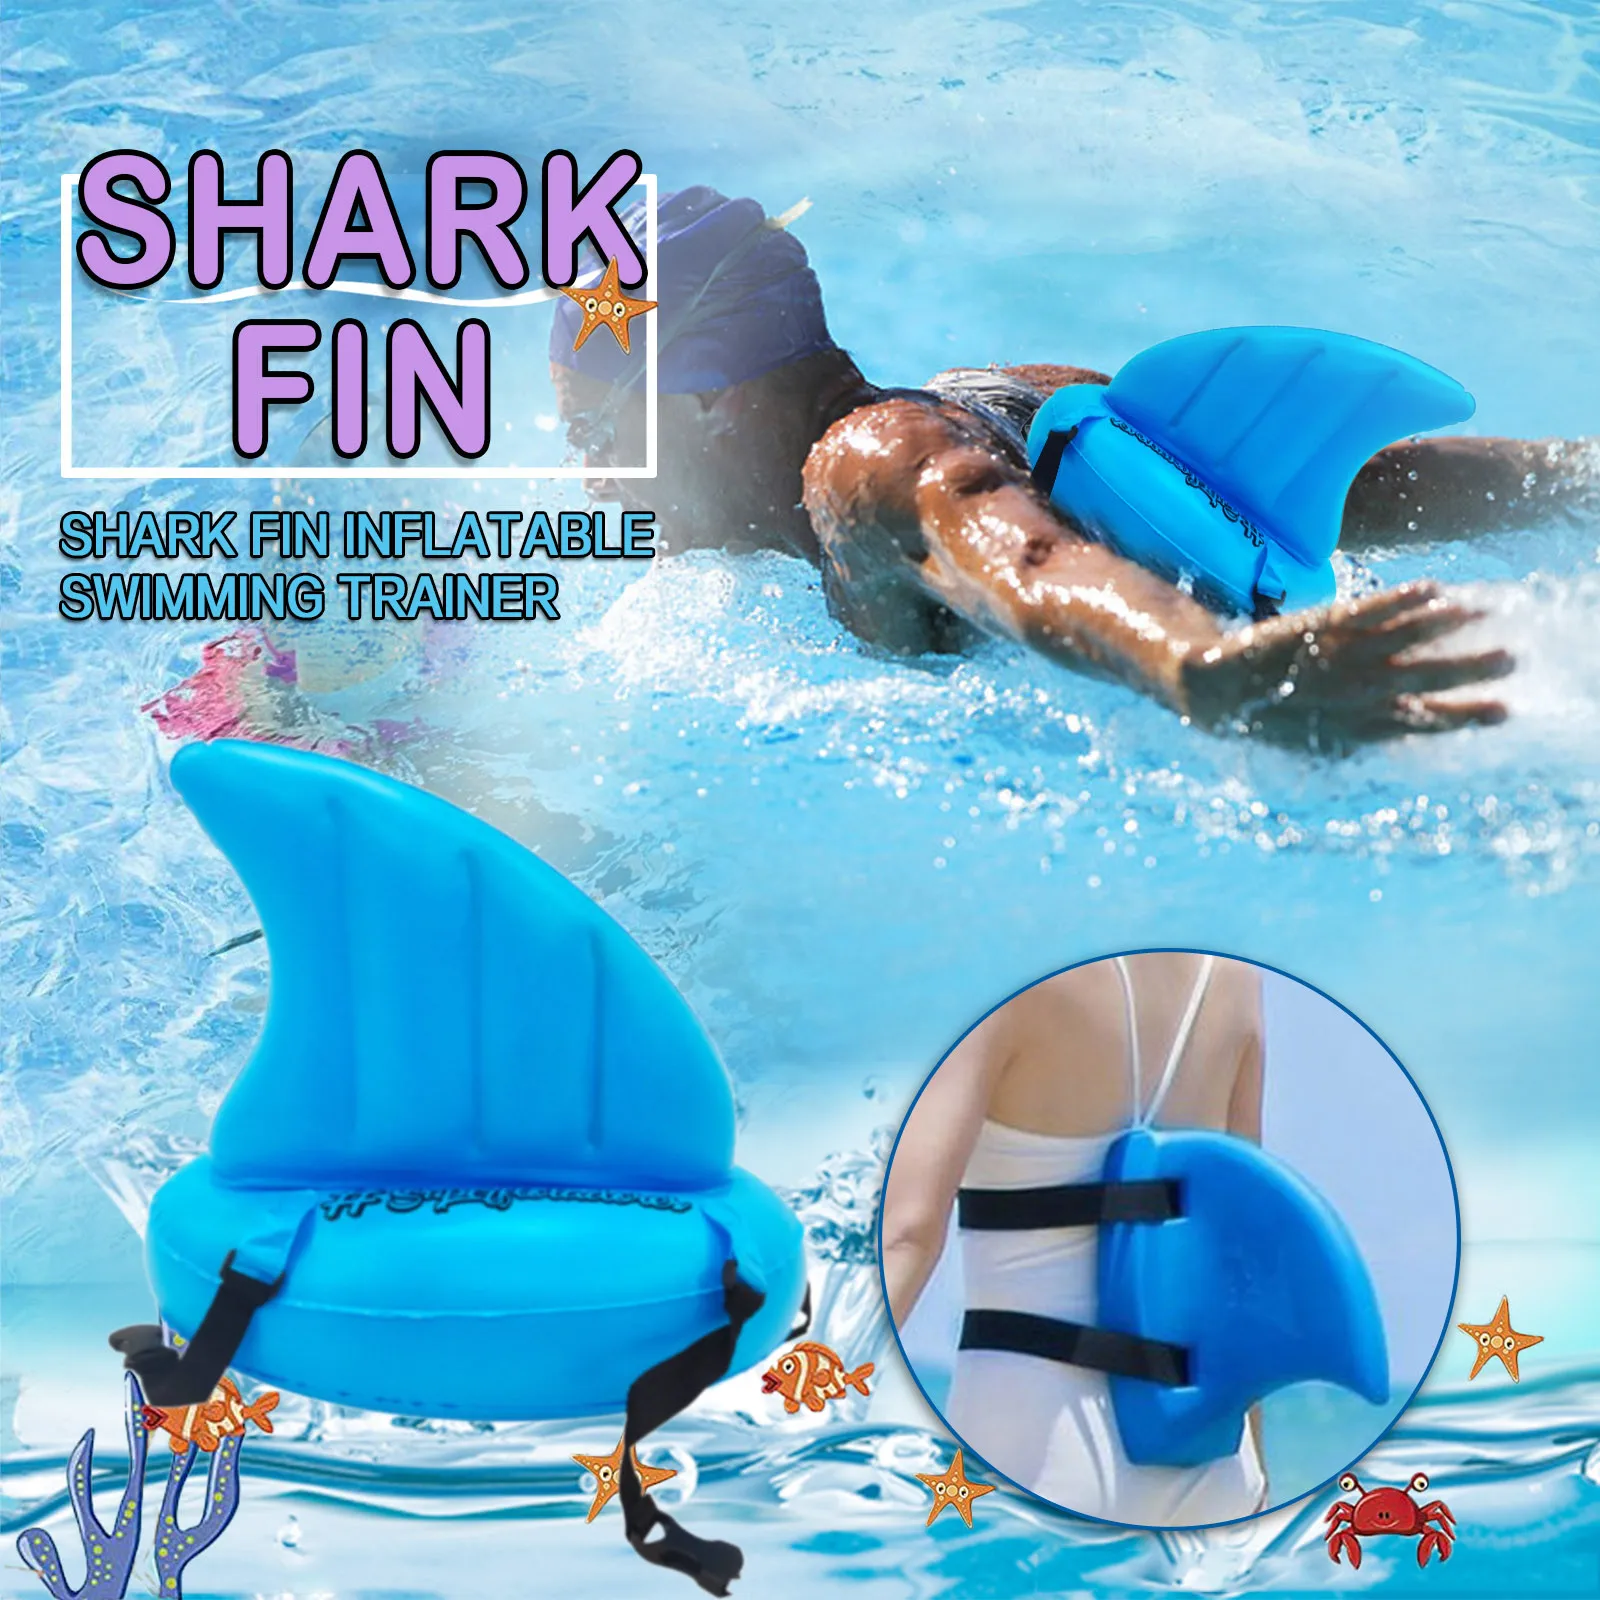 New Kids Shark Shape Fin Childs Swimming Training Pool Aid Inflatable Floats Toy 